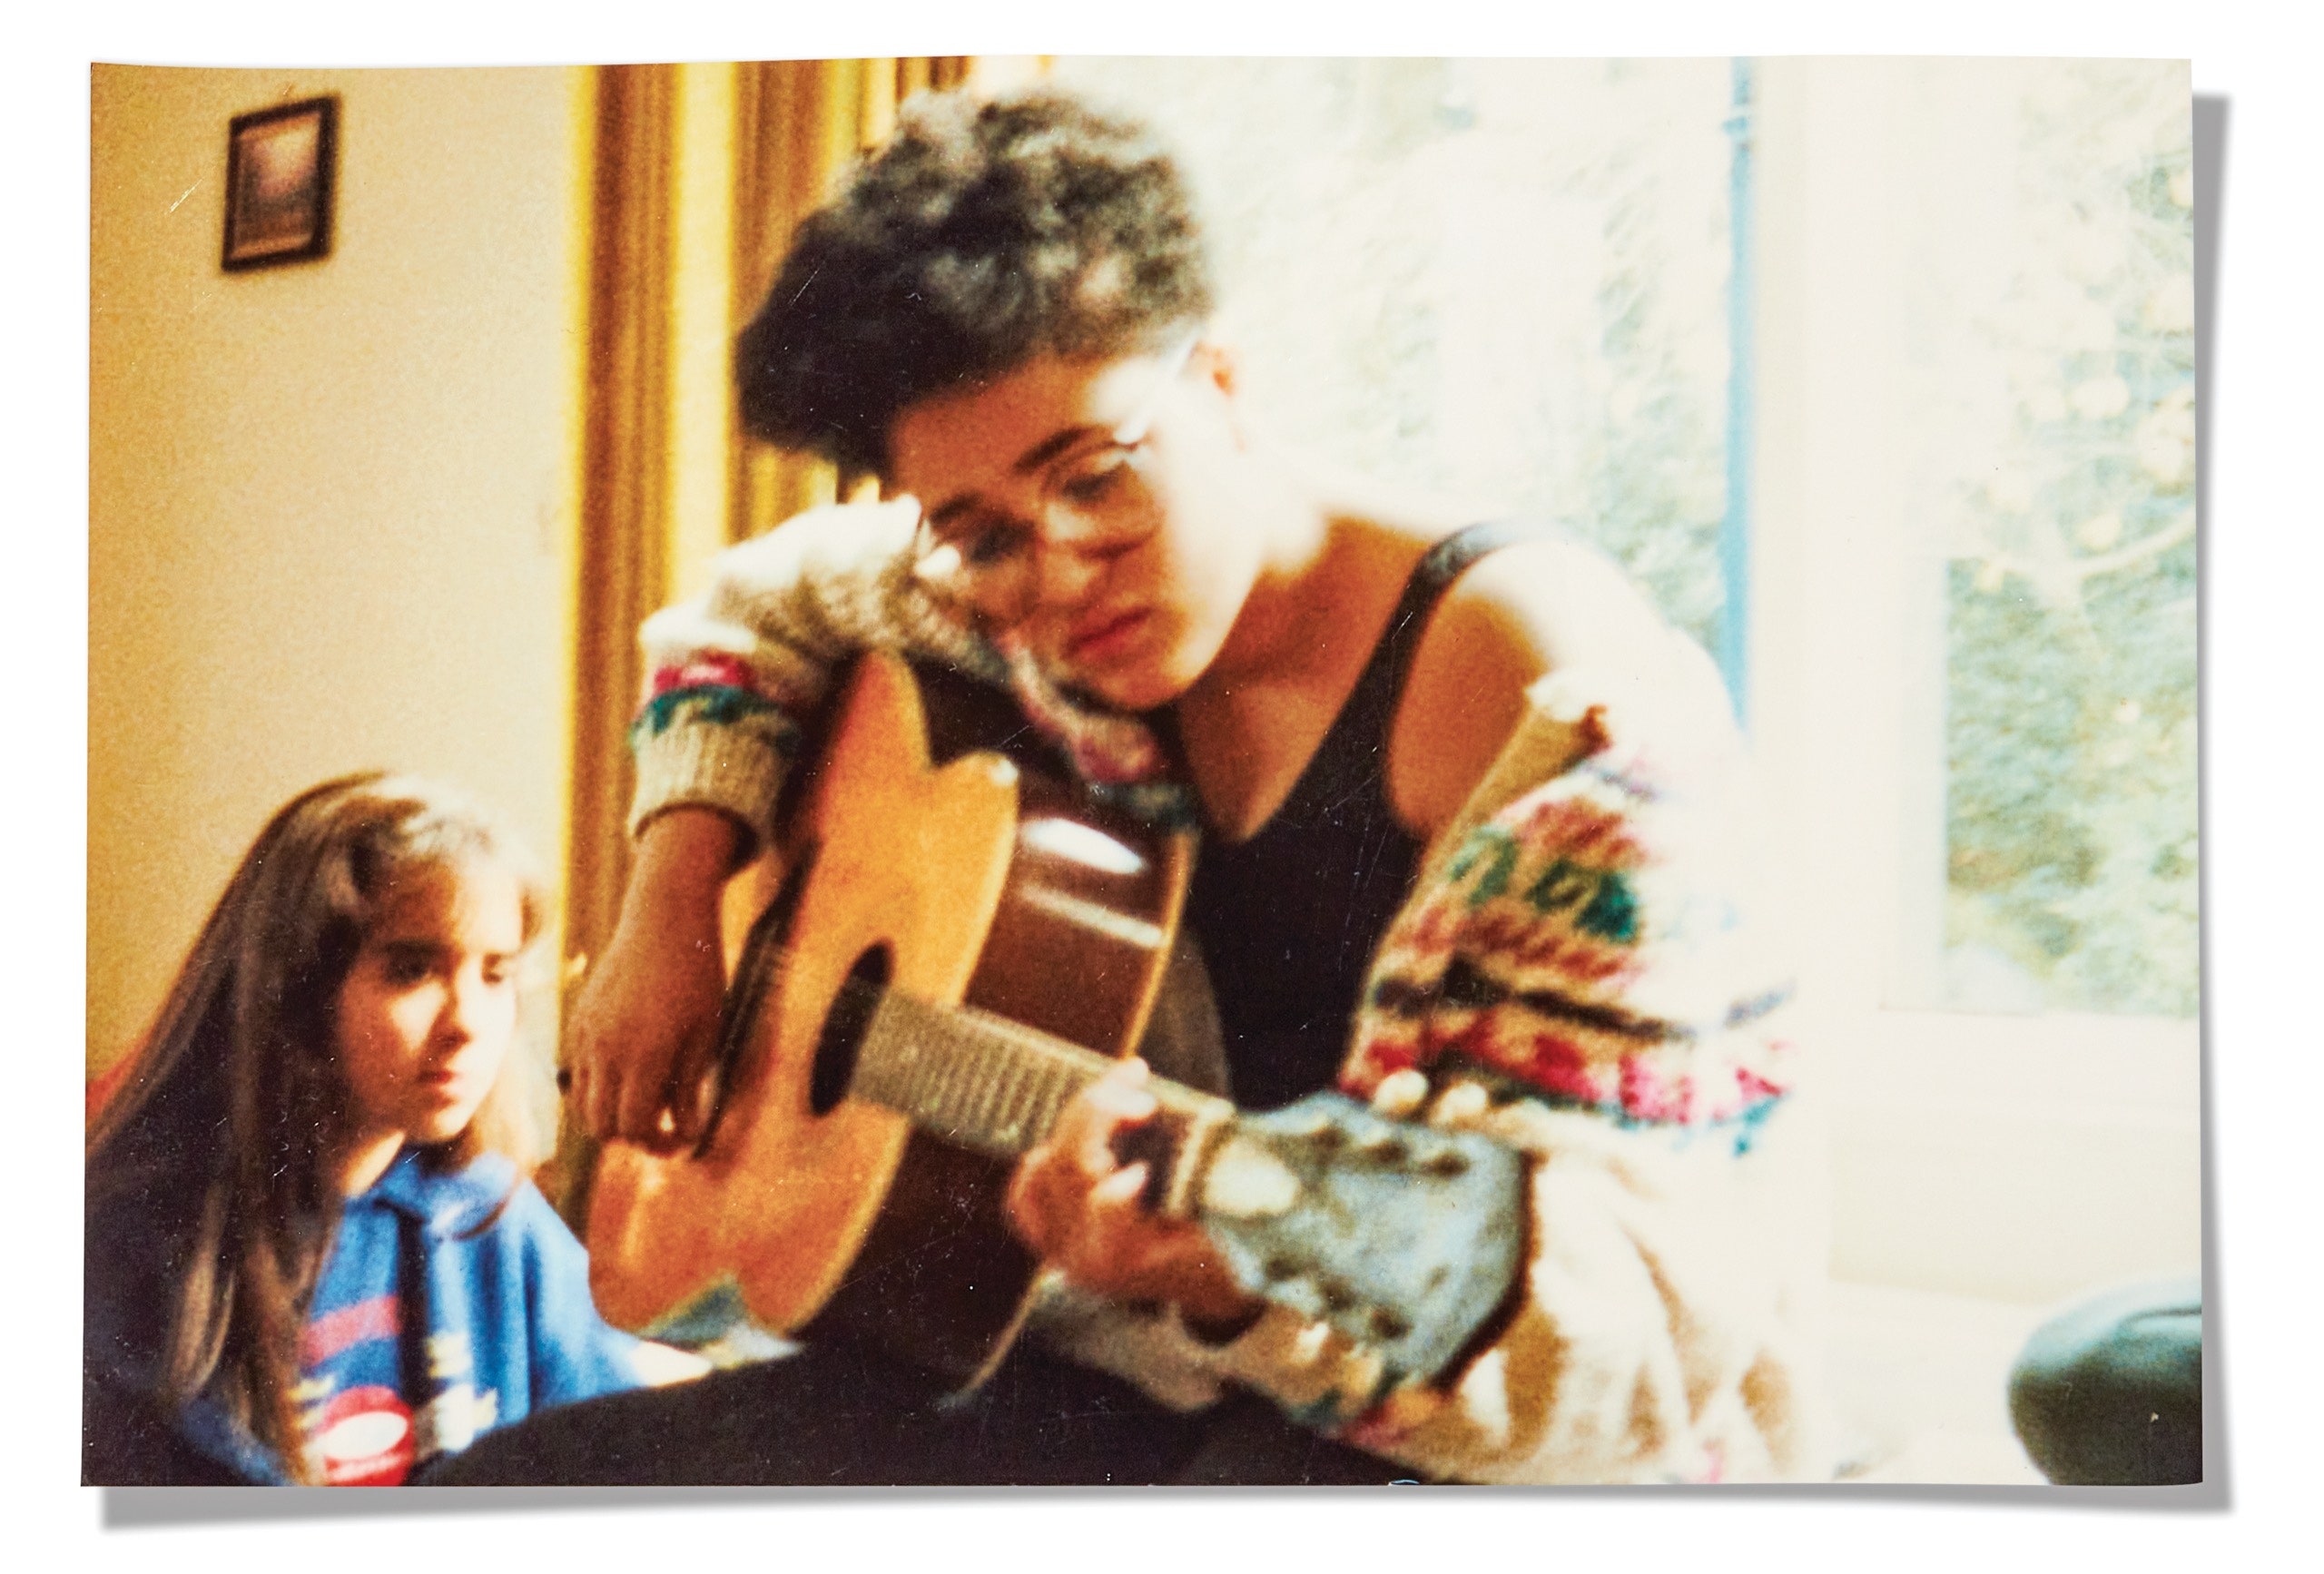 A scan of a photograph of Zadie Smith in her youth holding a guitar.